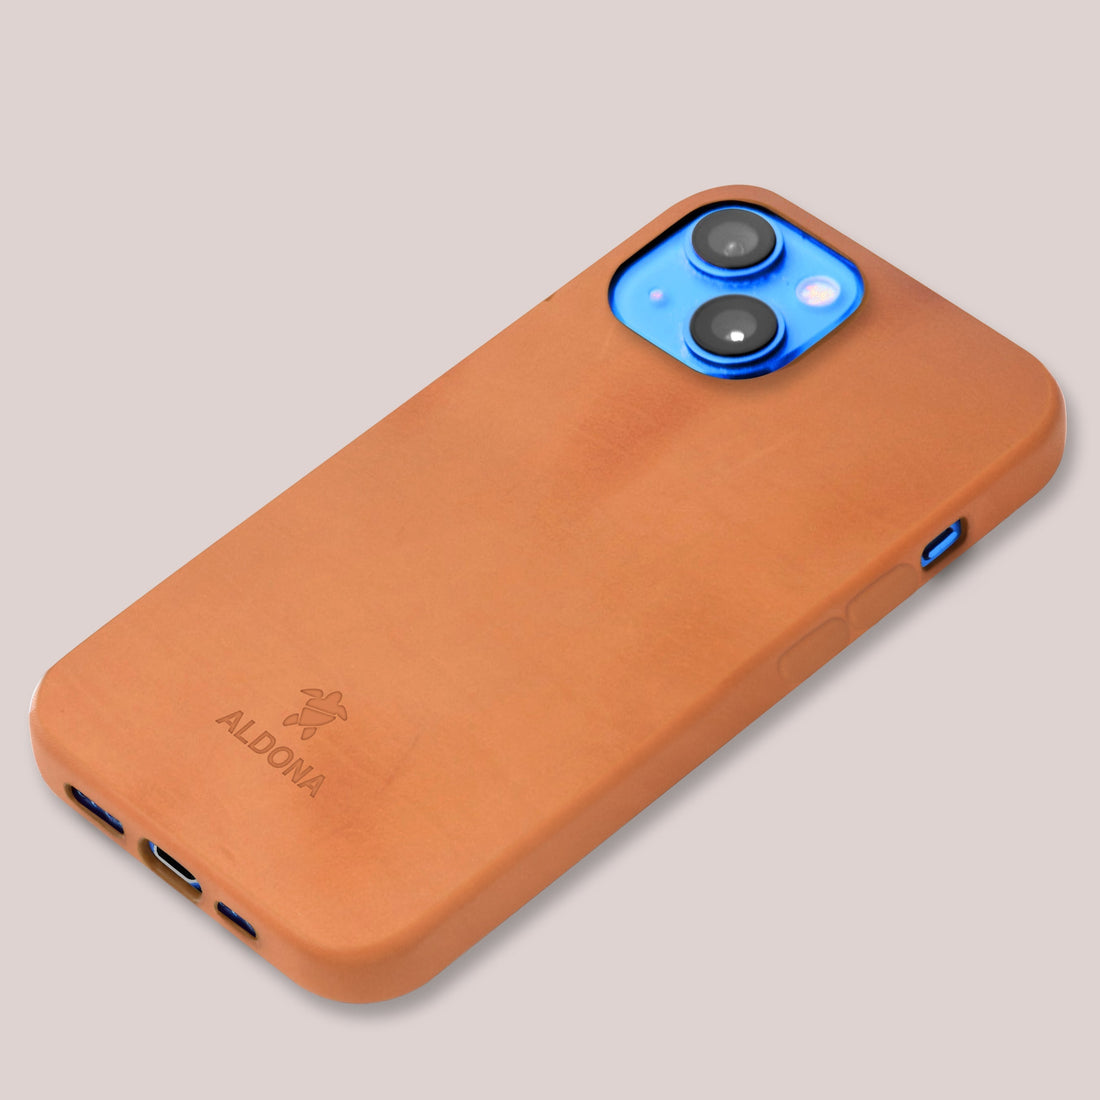 Kalon Case for iPhone 14 with MagSafe Compatibility - Cognac